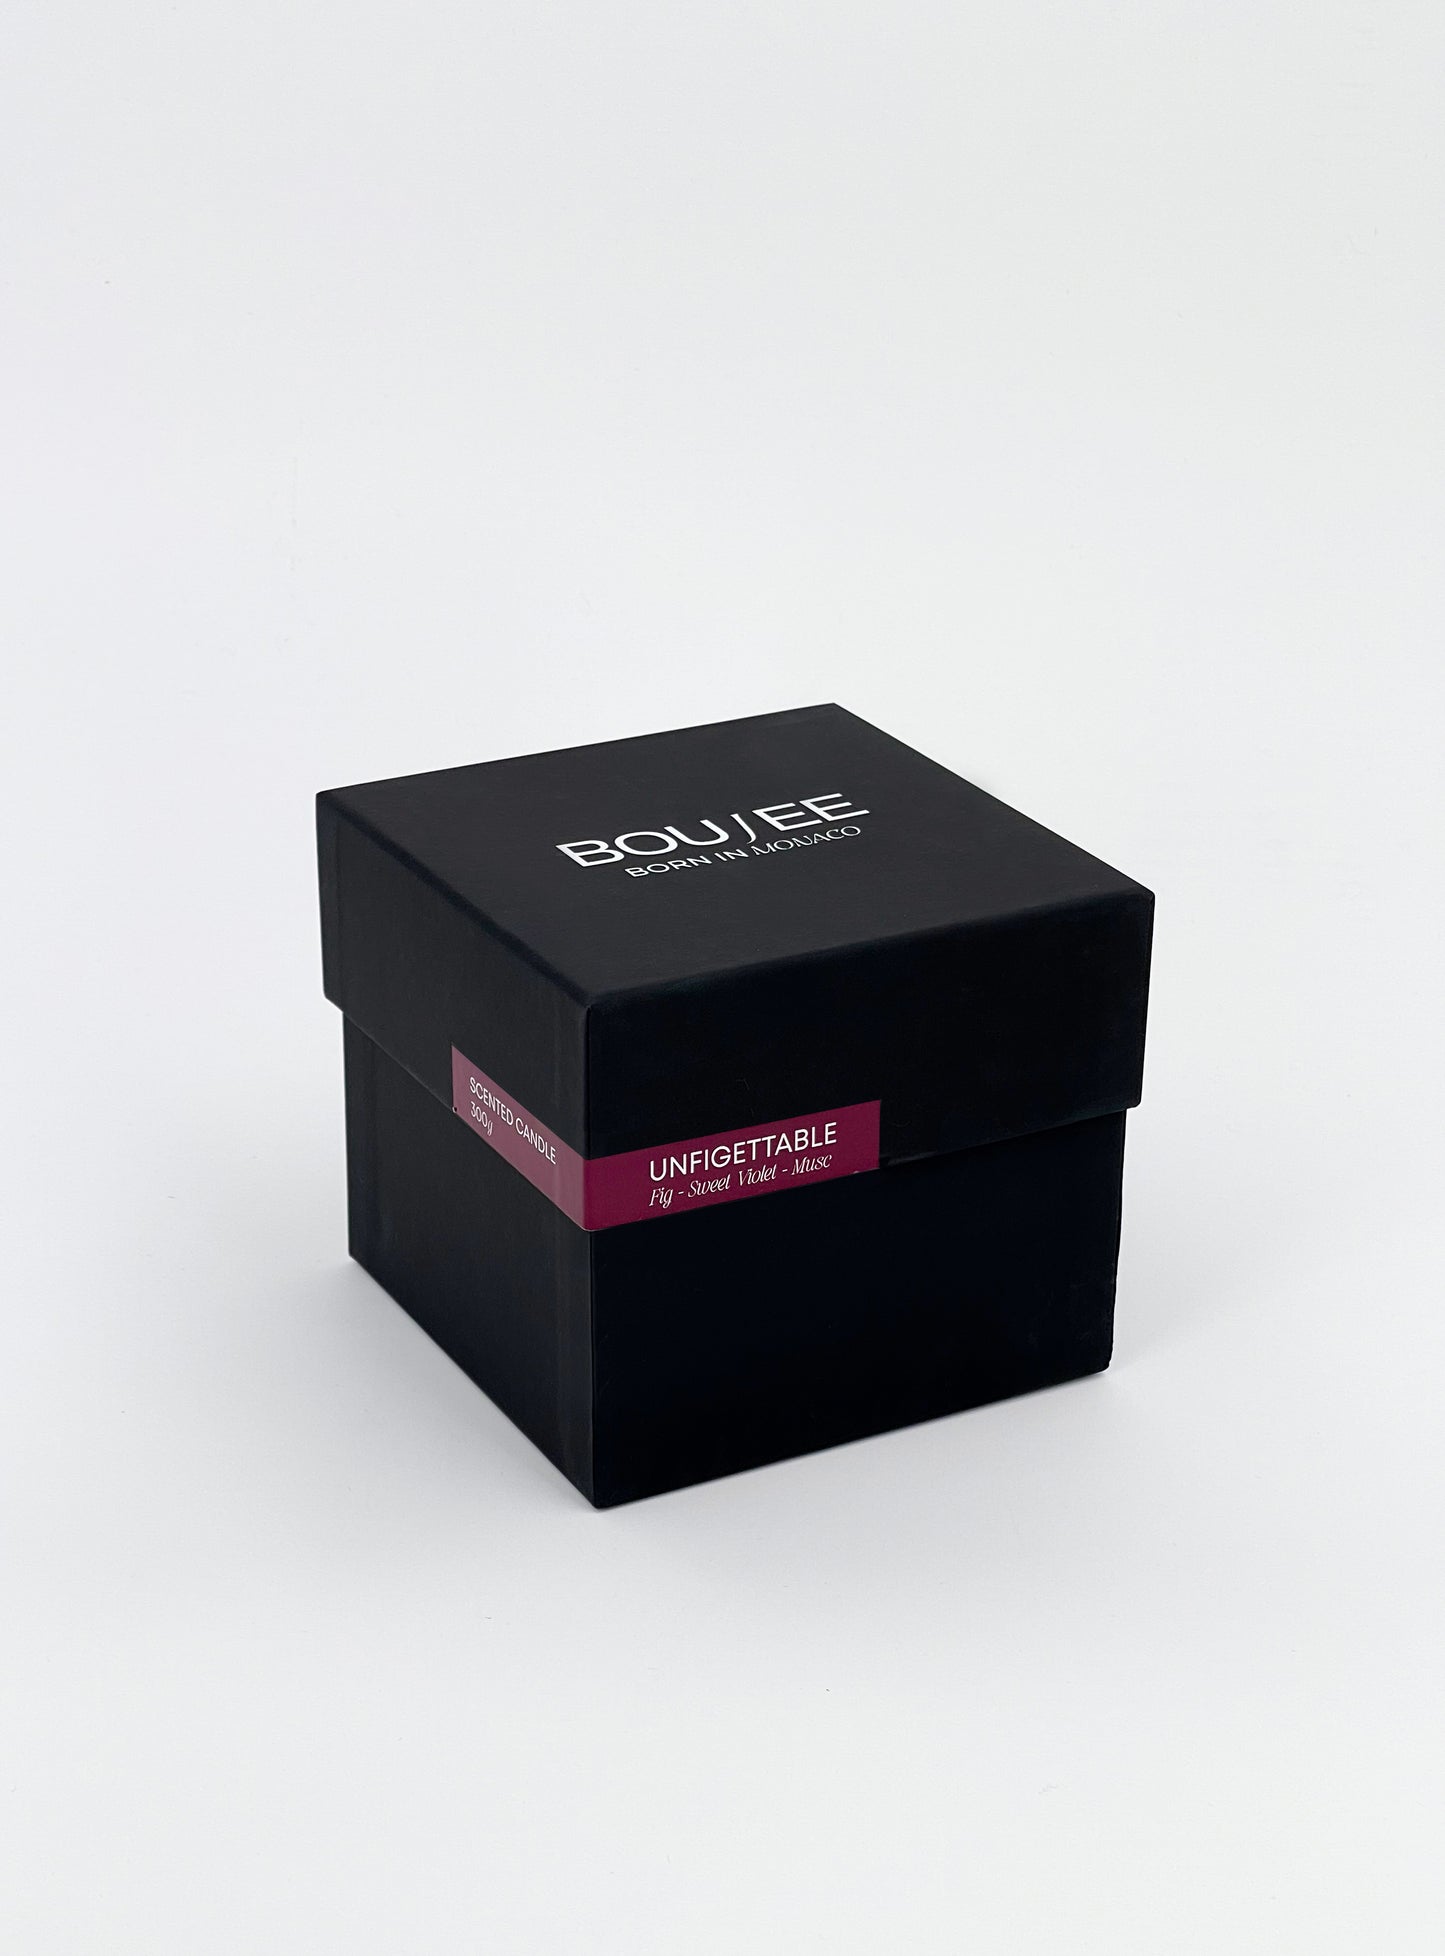 BOUJEE Monaco | Unfigettable Candle 300g